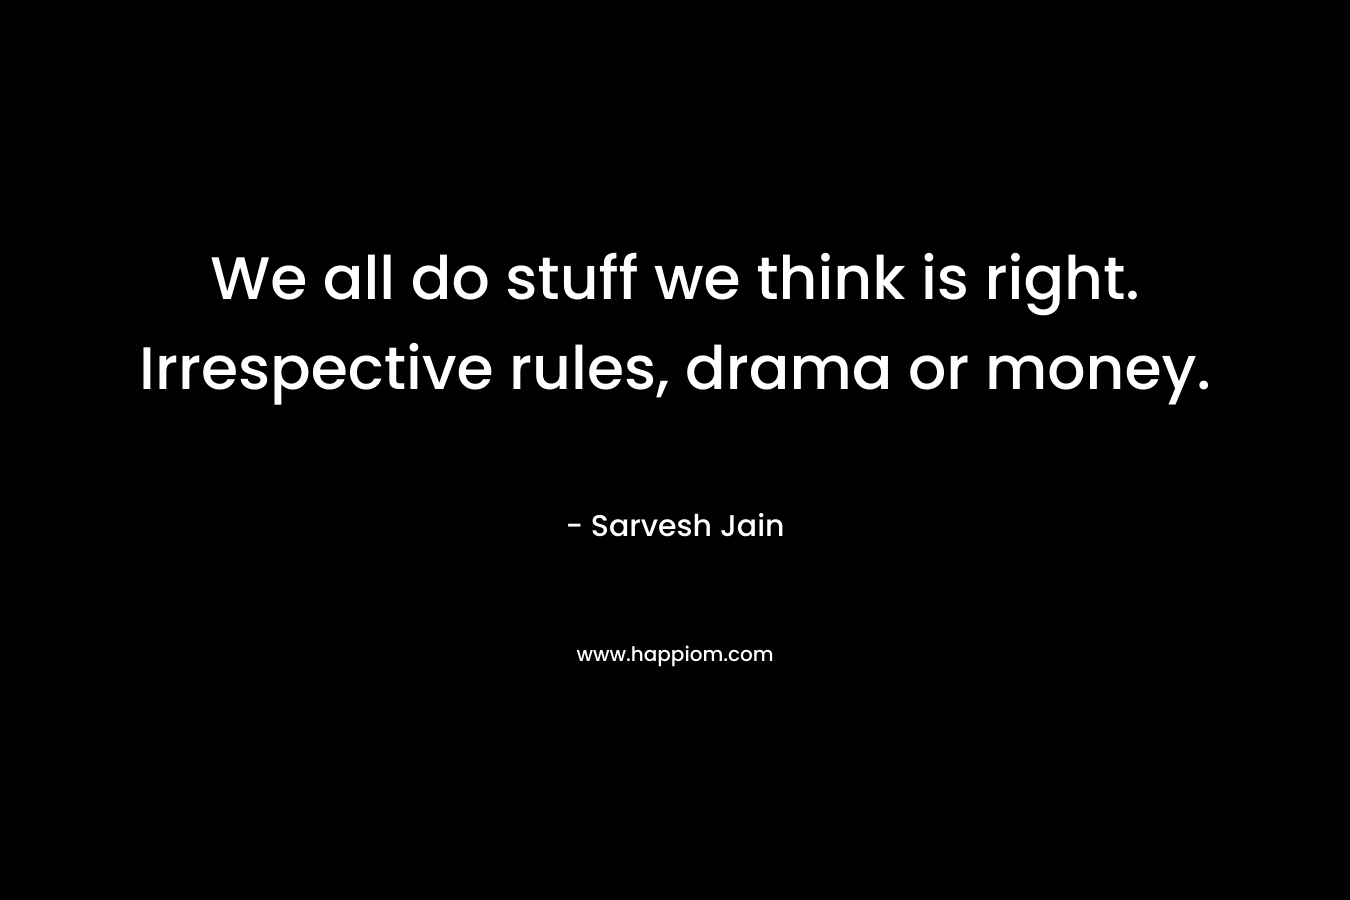 We all do stuff we think is right. Irrespective rules, drama or money.